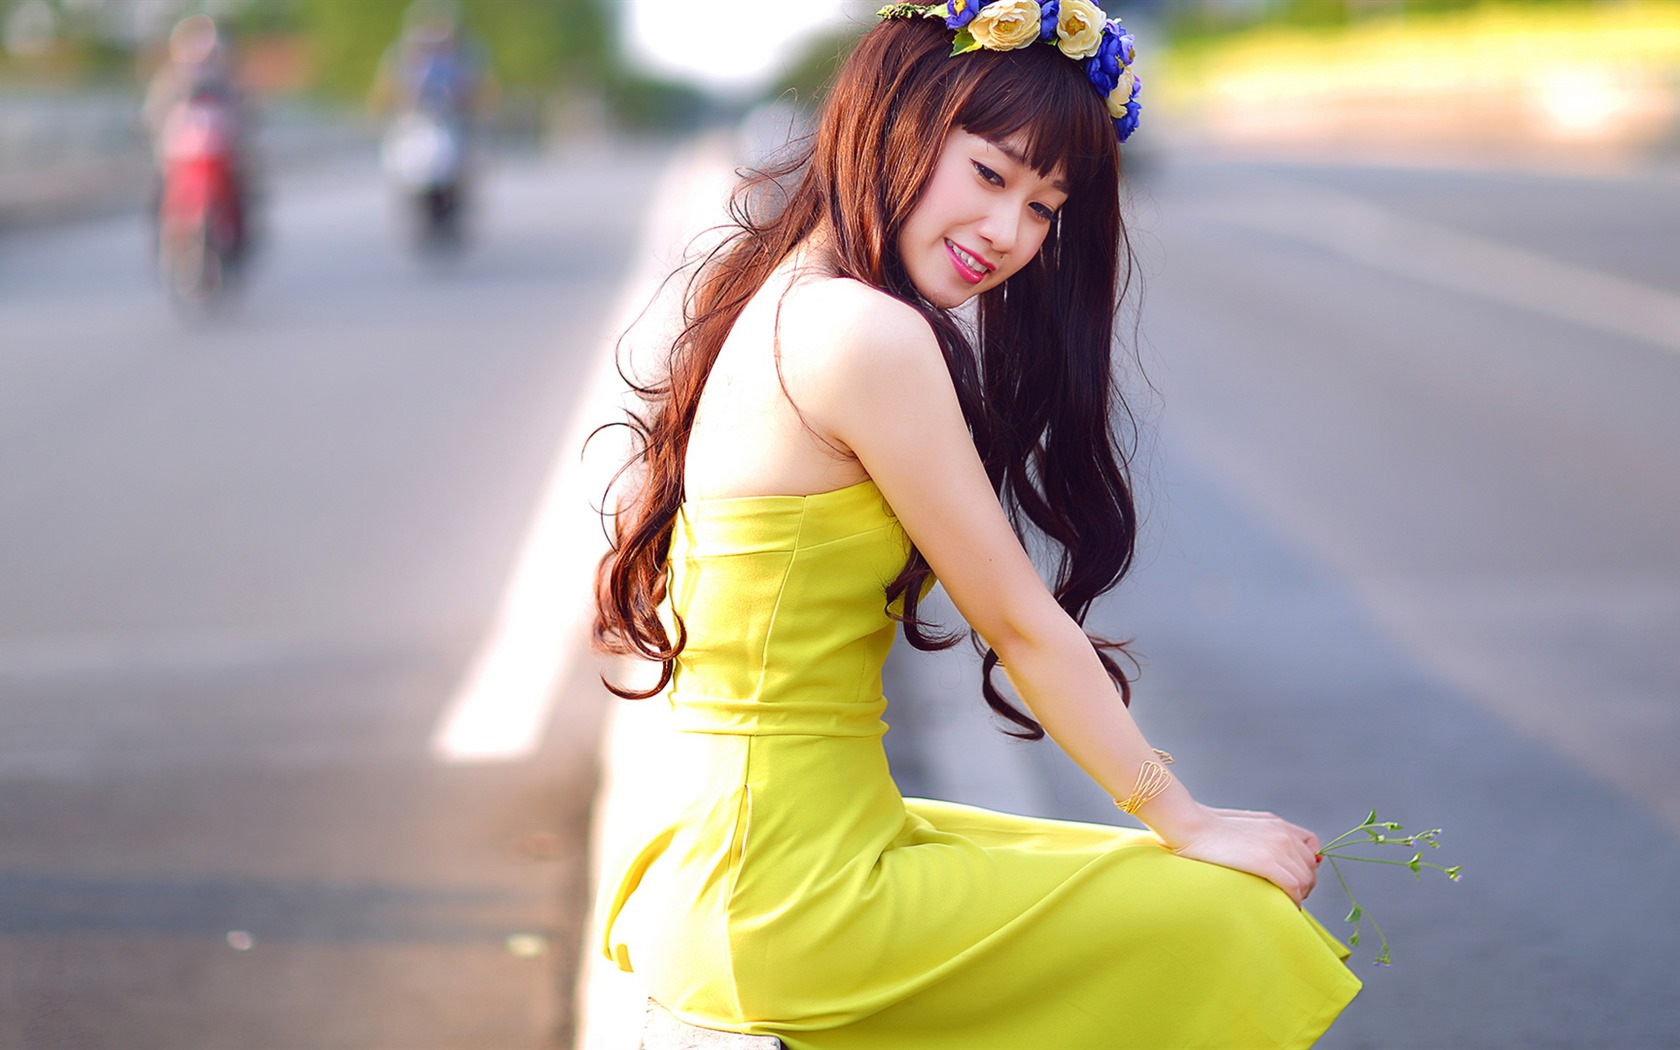 Pure and lovely young Asian girl HD wallpapers collection (2) #27 - 1680x1050